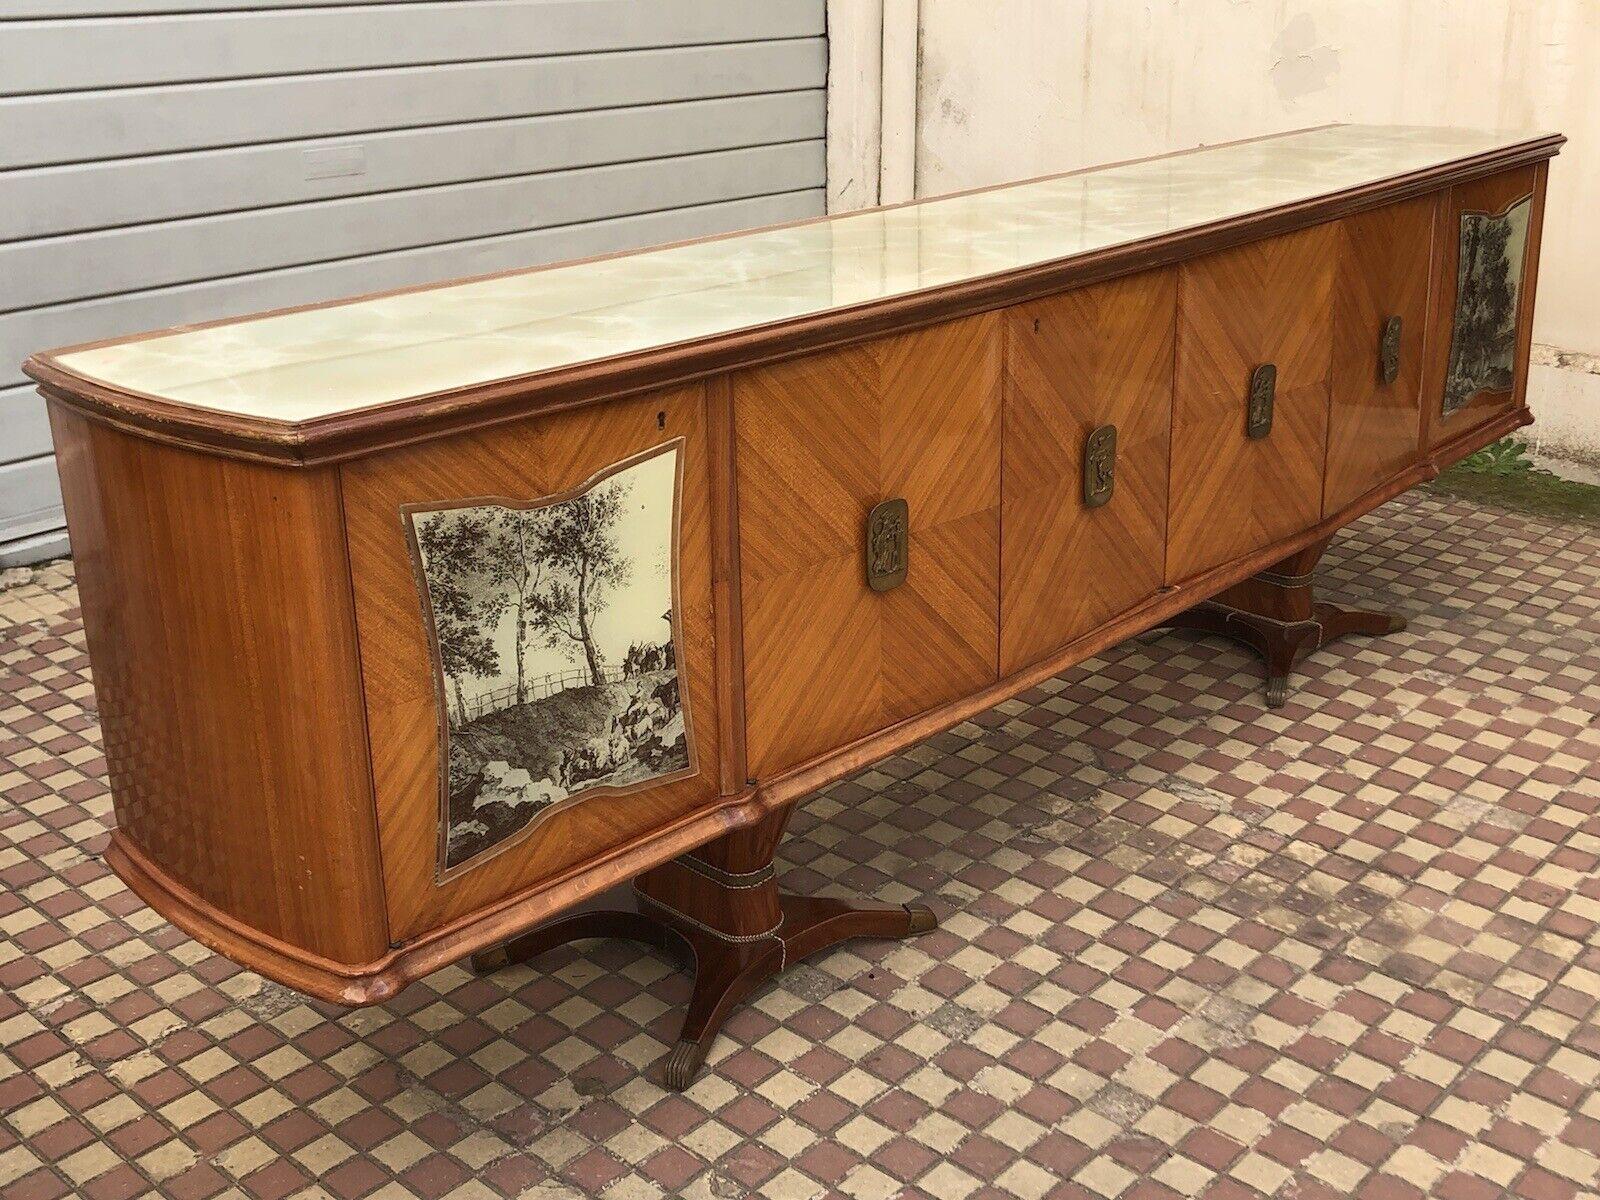 1950s-wonderful and elegant sideboard production Rigamonti brothers Desio Milan.

Wood frame, pearwood interior, brass handles and details, marbled glass top.

Item is in excellent conservative condition, there is no aesthetic or structural defect